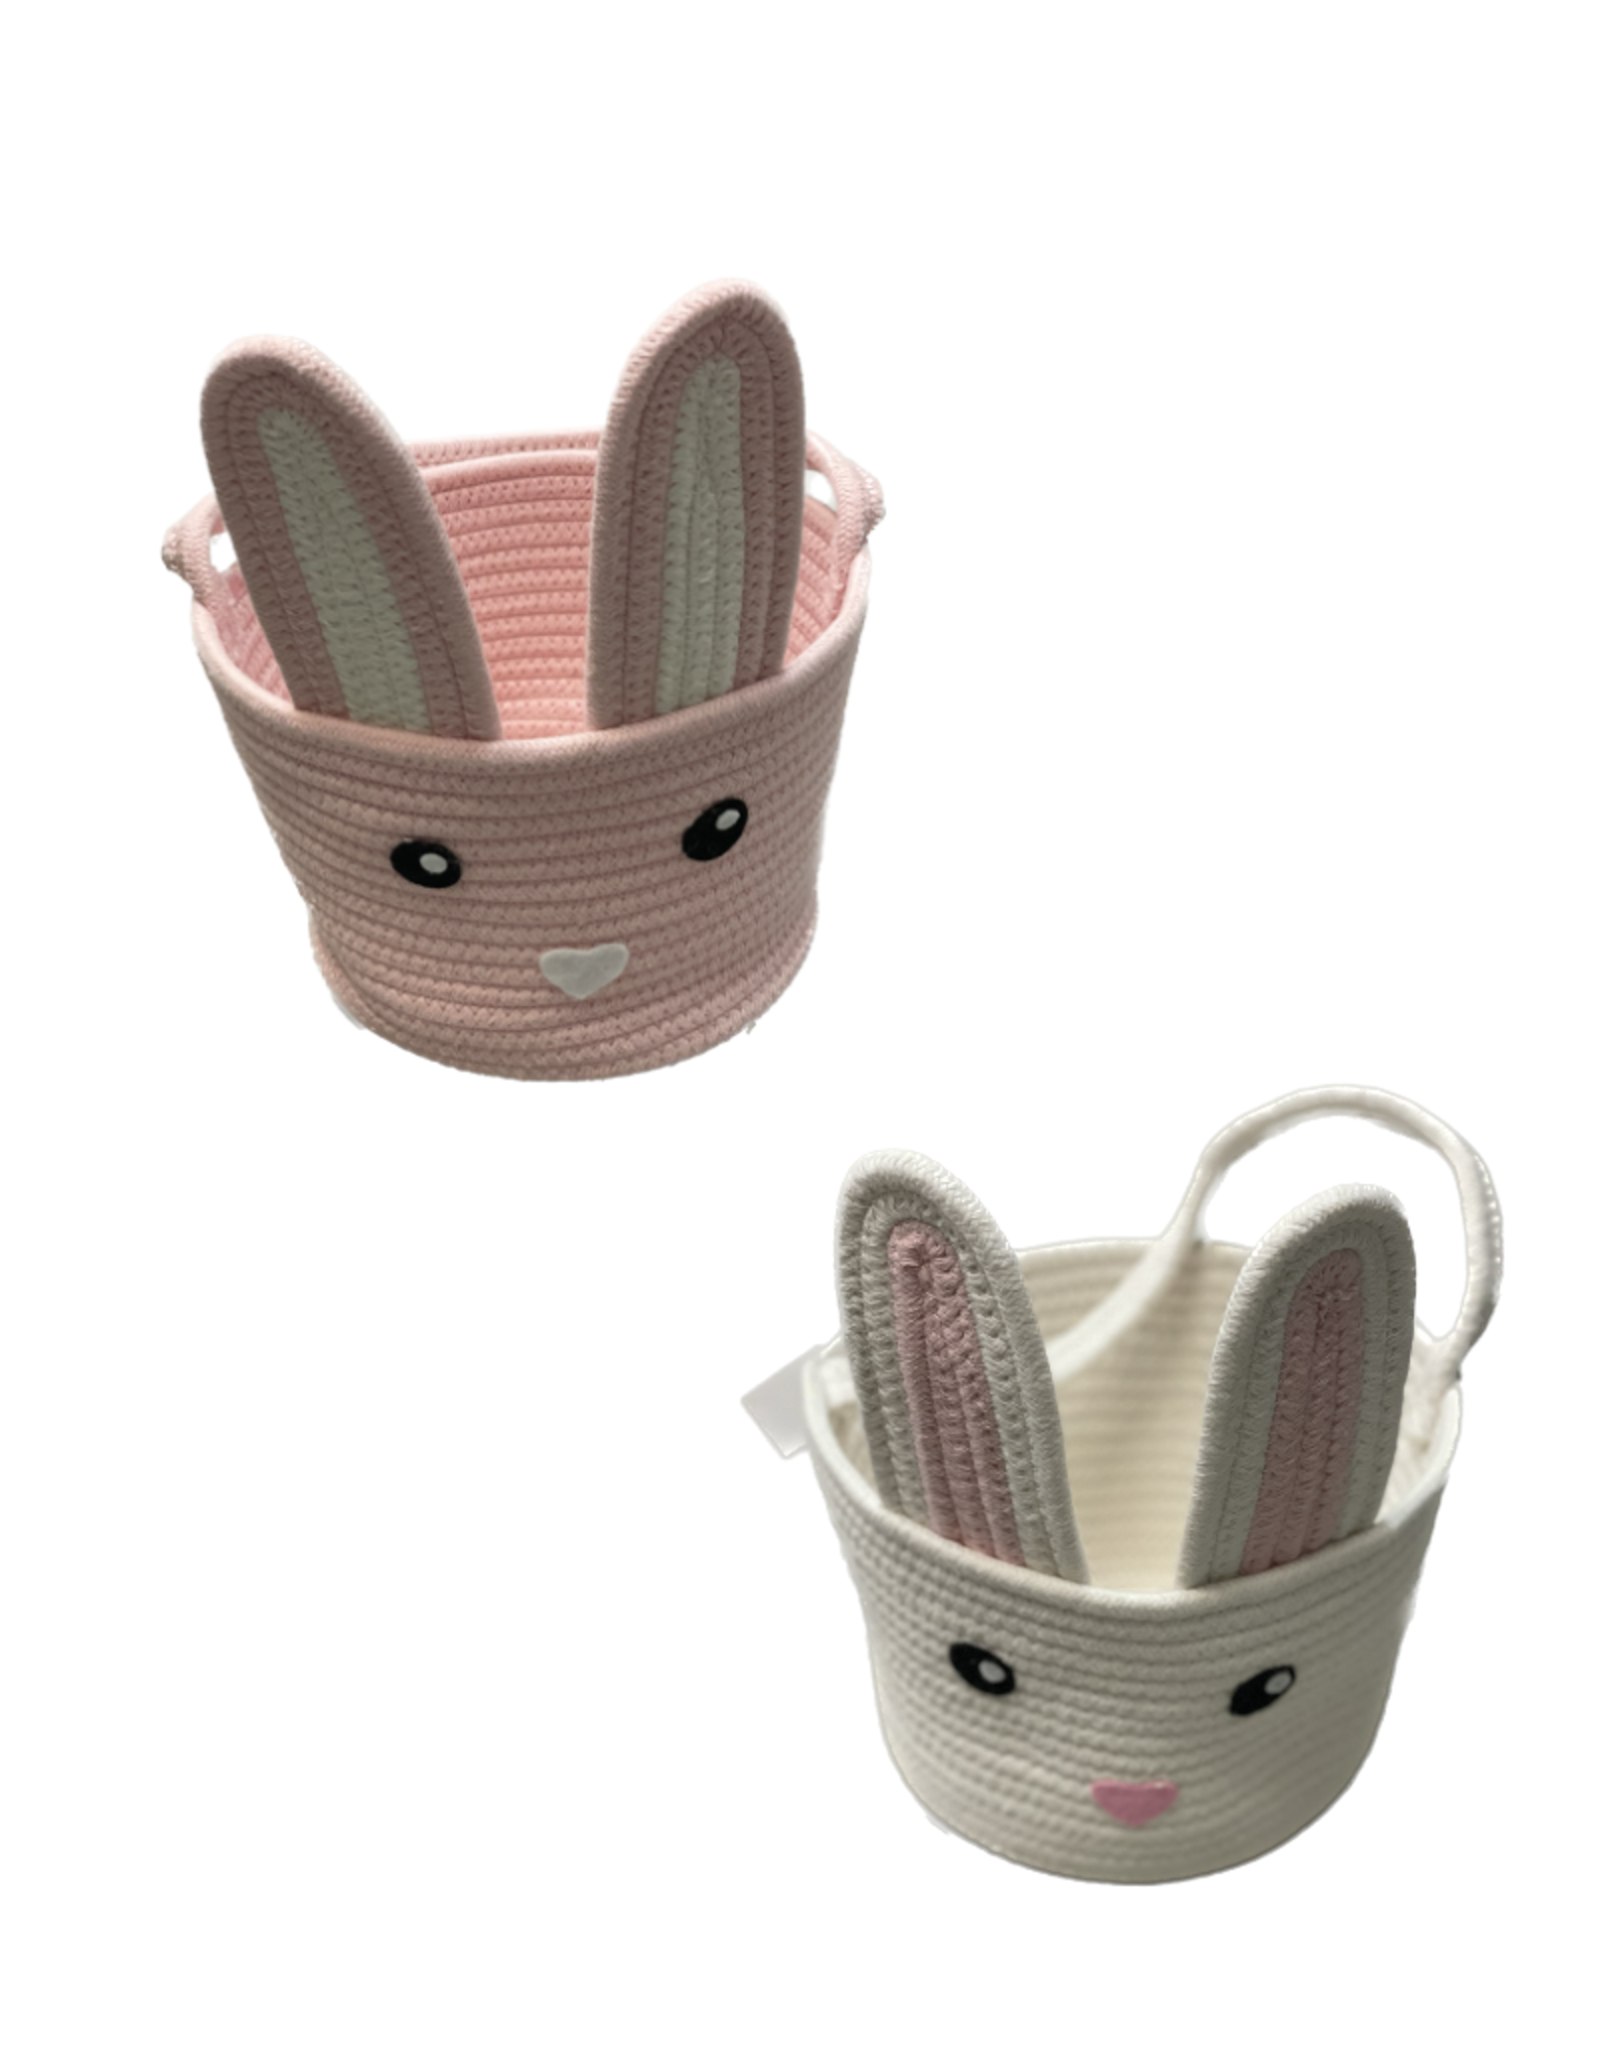 Two's Company Hand Crafted Woven Bunny Basket